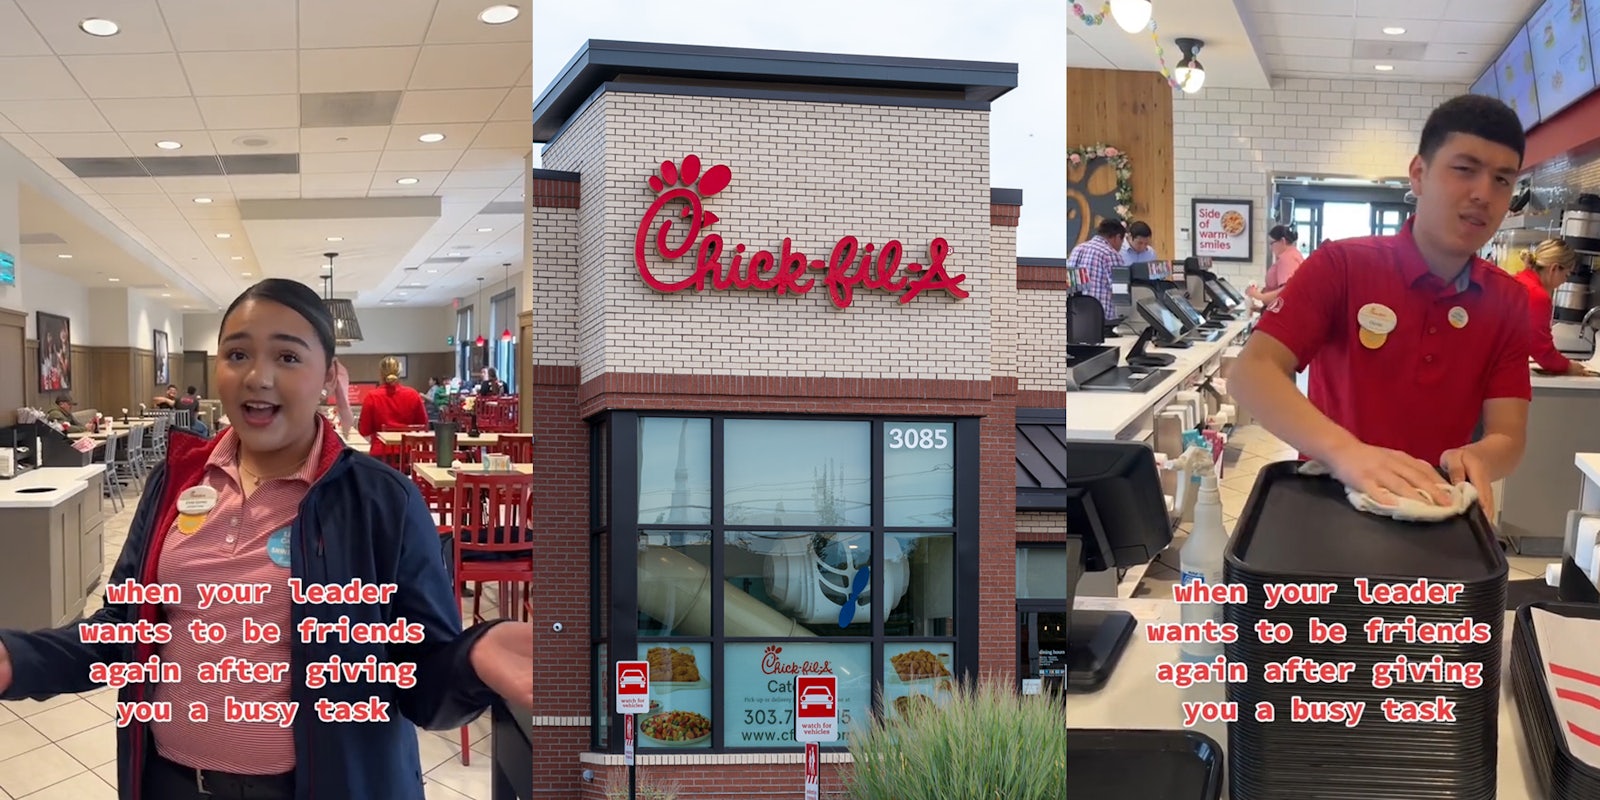 Chick-Fil-A employee with arms out with caption 'when your leader wants to be friends again after giving you a busy task' (l) Chick-Fil-A building with sign (c) Chick-Fil-A employee cleaning tray with caption 'when your leader wants to be friends again after giving you a busy task' (r)